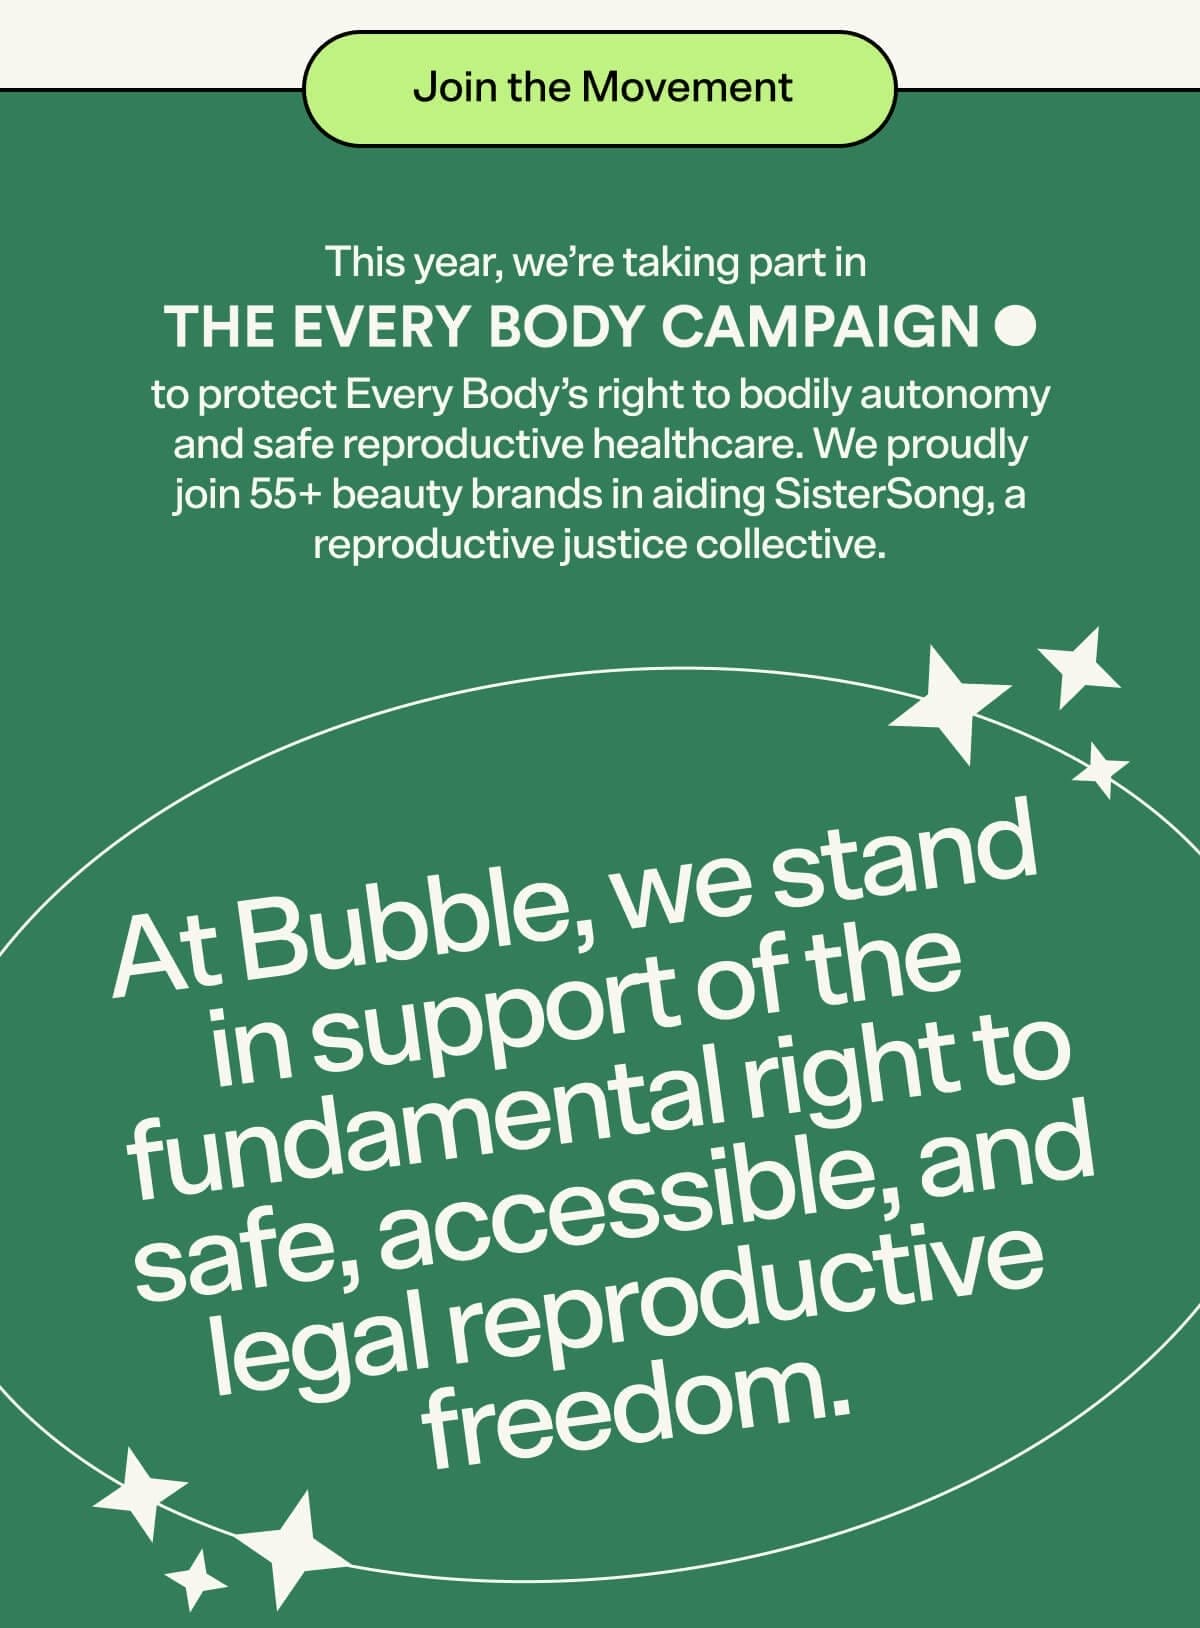 Join the Movement. This year, we’re taking part in the Every Body Campaign to protect Every Body’s right to bodily autonomy and safe reproductive healthcare. We proudly join 55+ beauty brands in aiding SisterSong, a reproductive justice collective. At Bubble, we stand in support of the fundamental right to safe, accessible, and legal reproductive freedom.